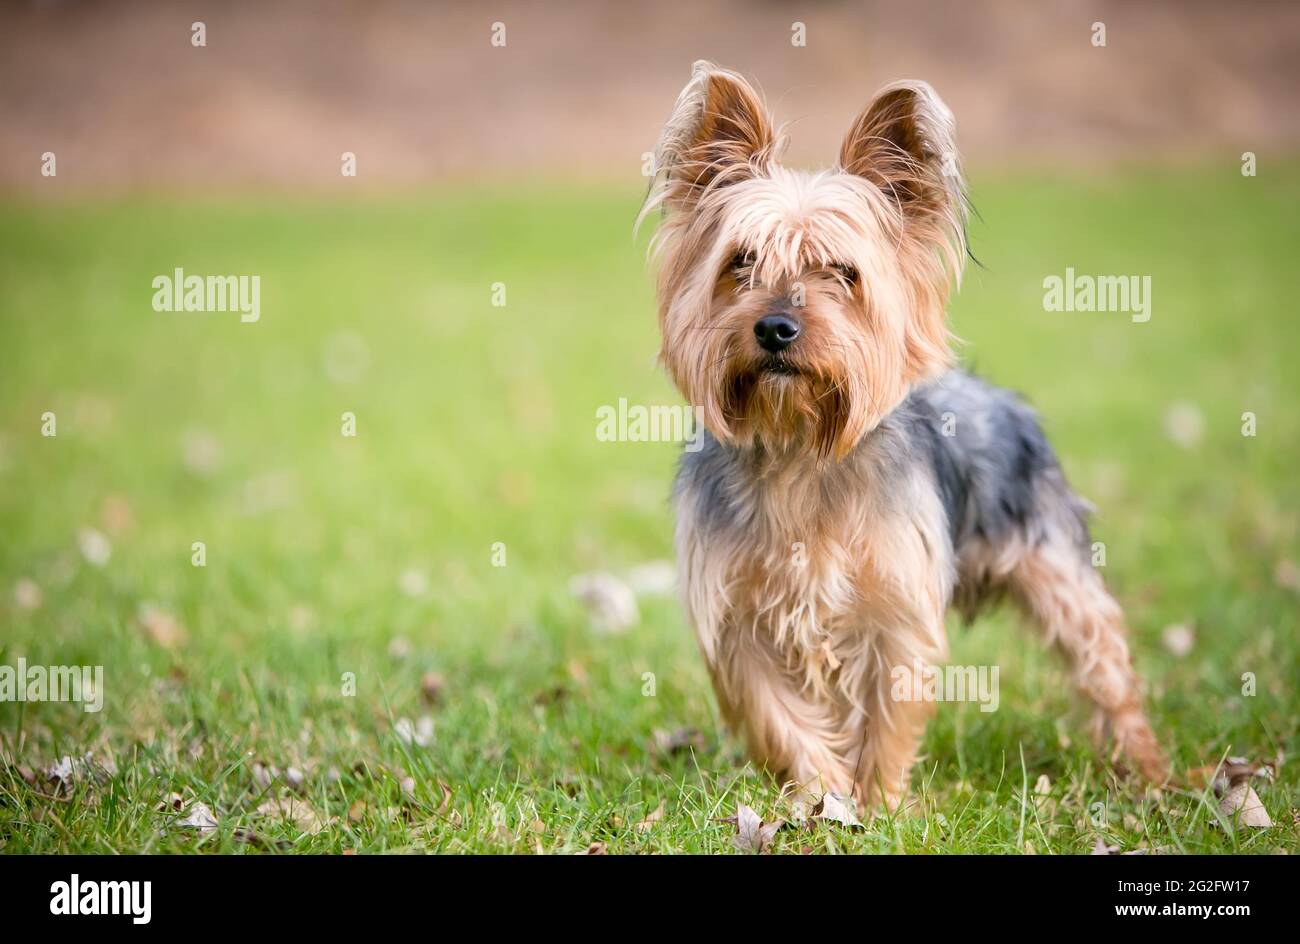 A Silky Terrier mixed breed dog standing outdoors in the grass Stock Photo